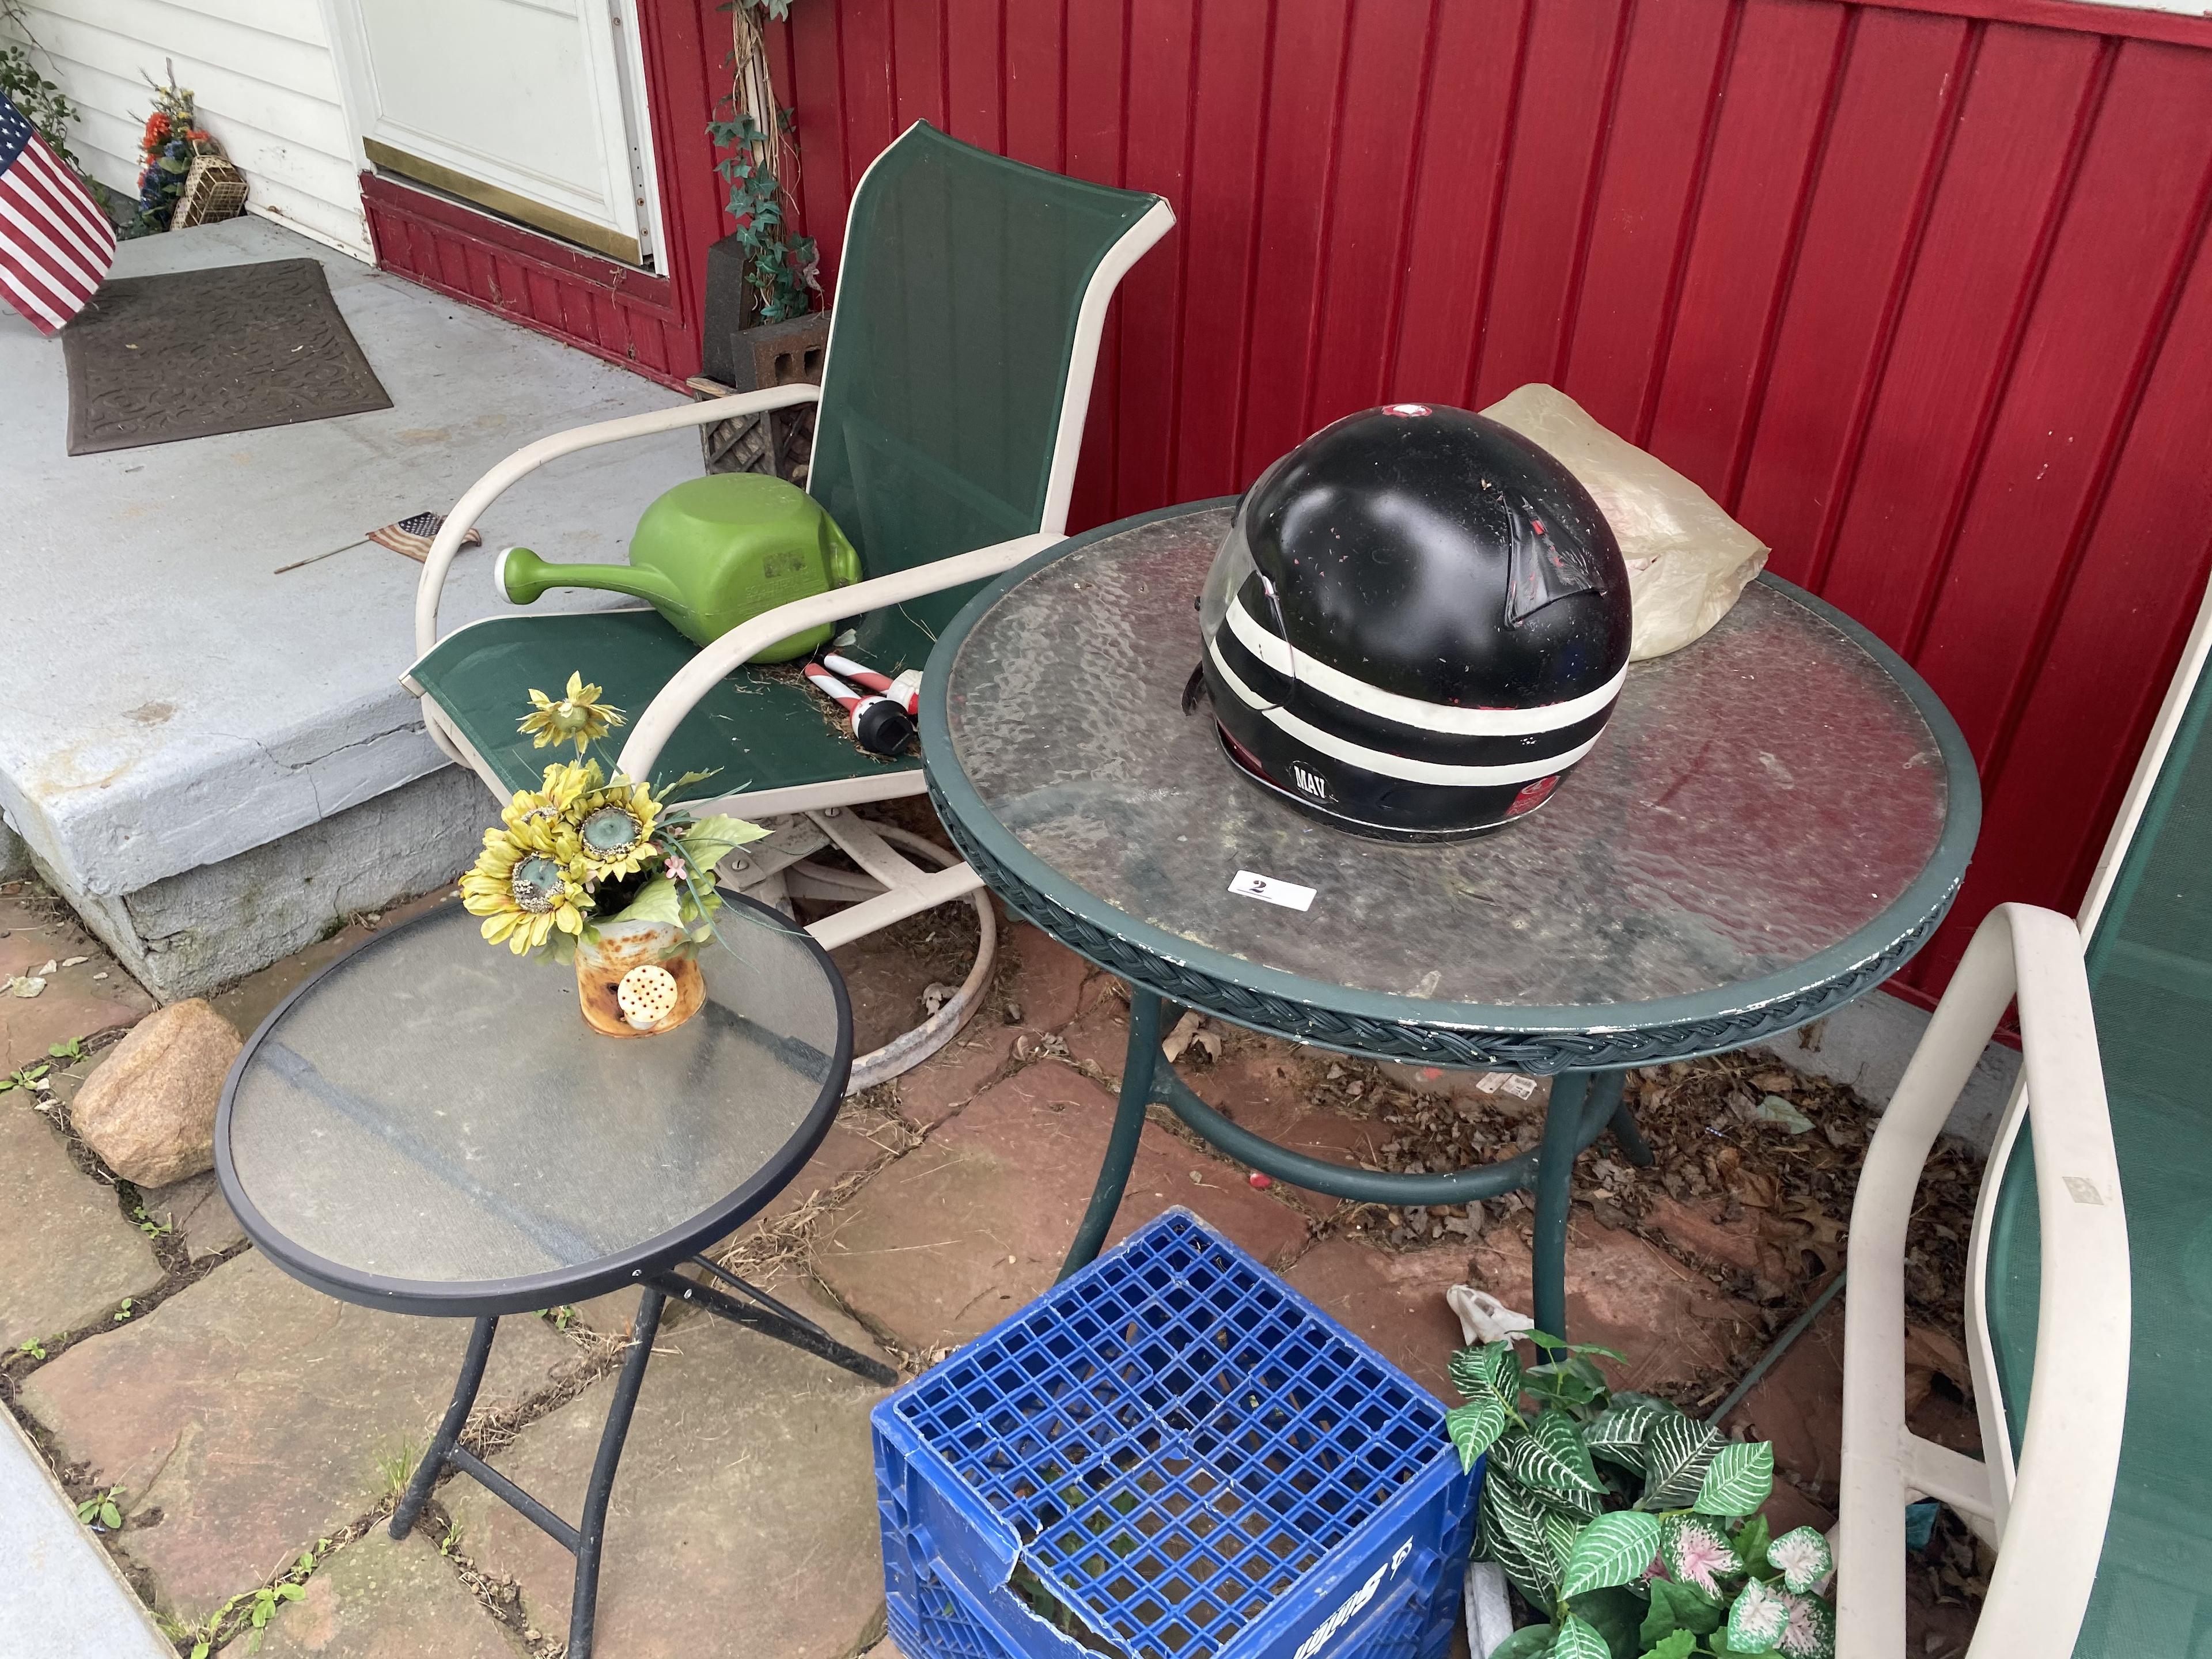 Outdoor items in front of house